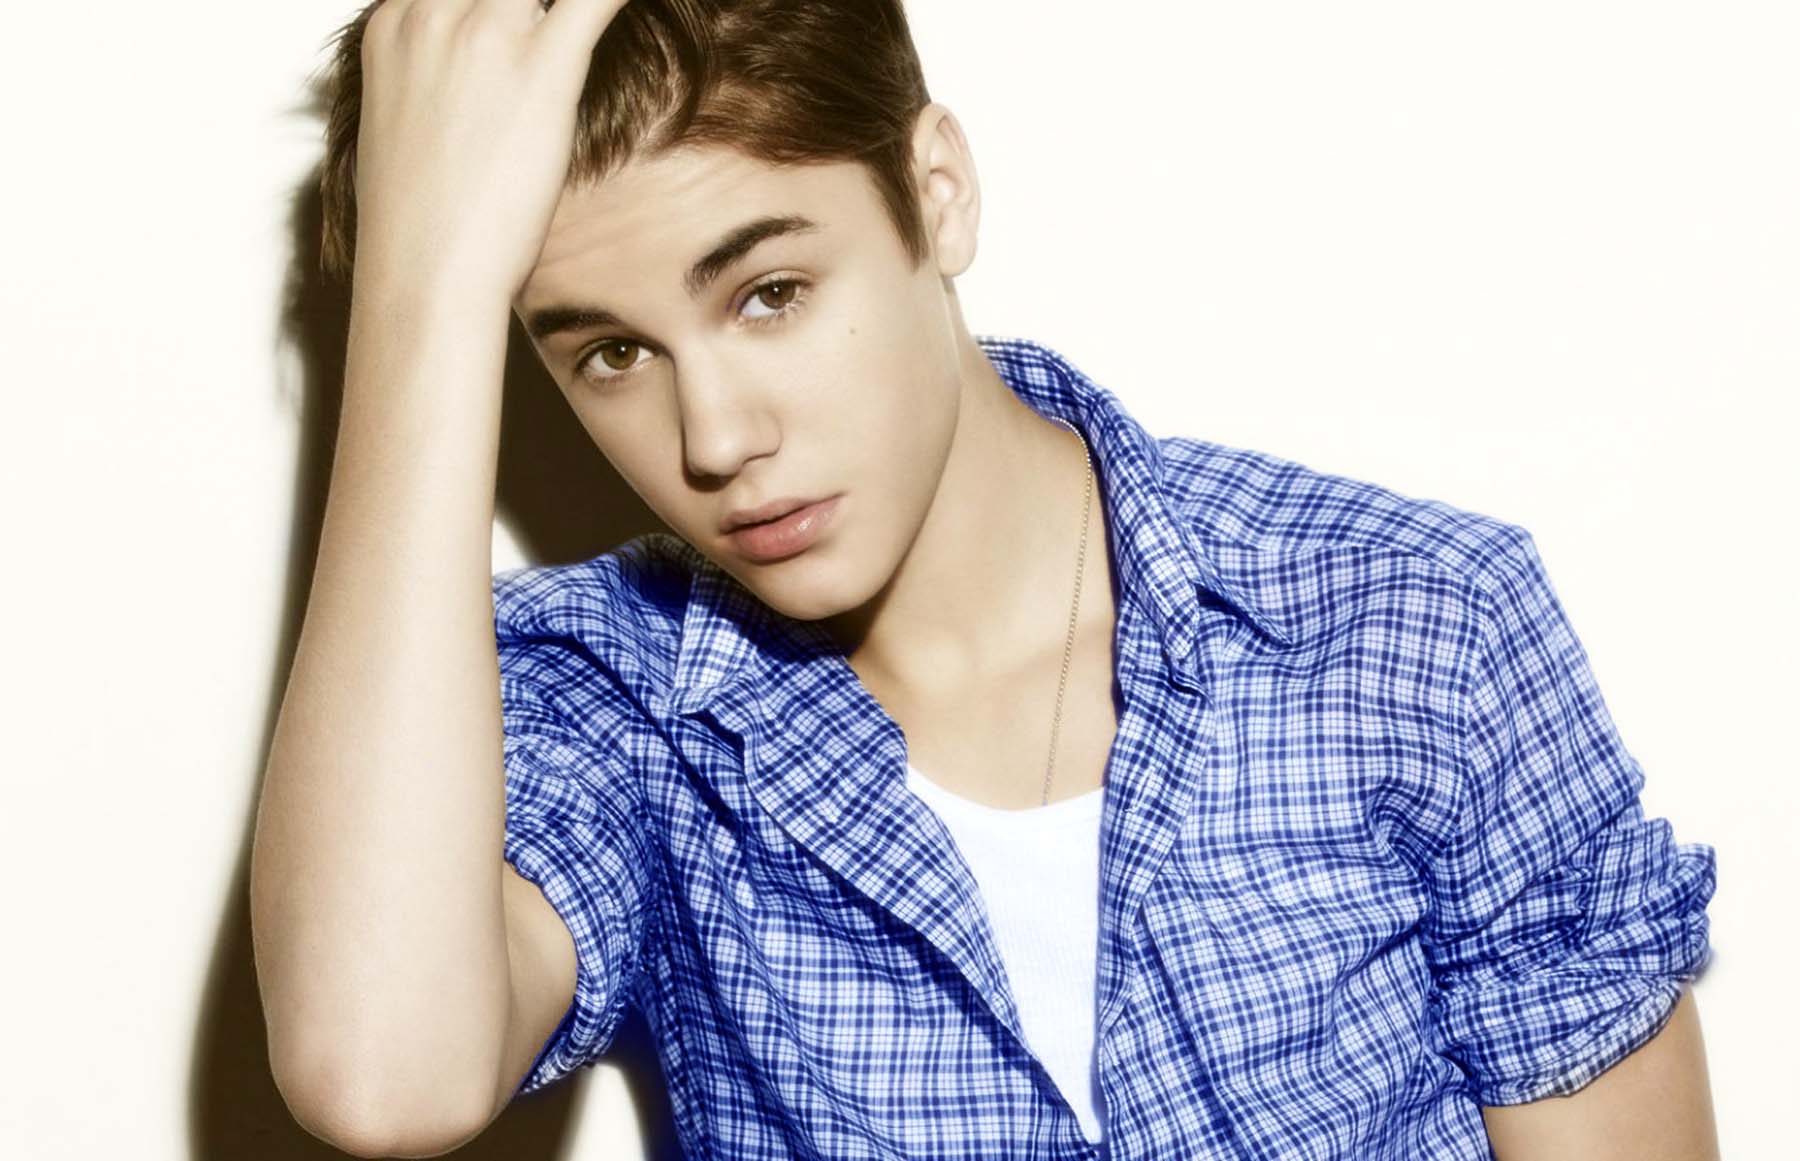 Justin Bieber Hd Wallpapers And Photos Bodyceleb - Justin Bieber In Shirt - HD Wallpaper 